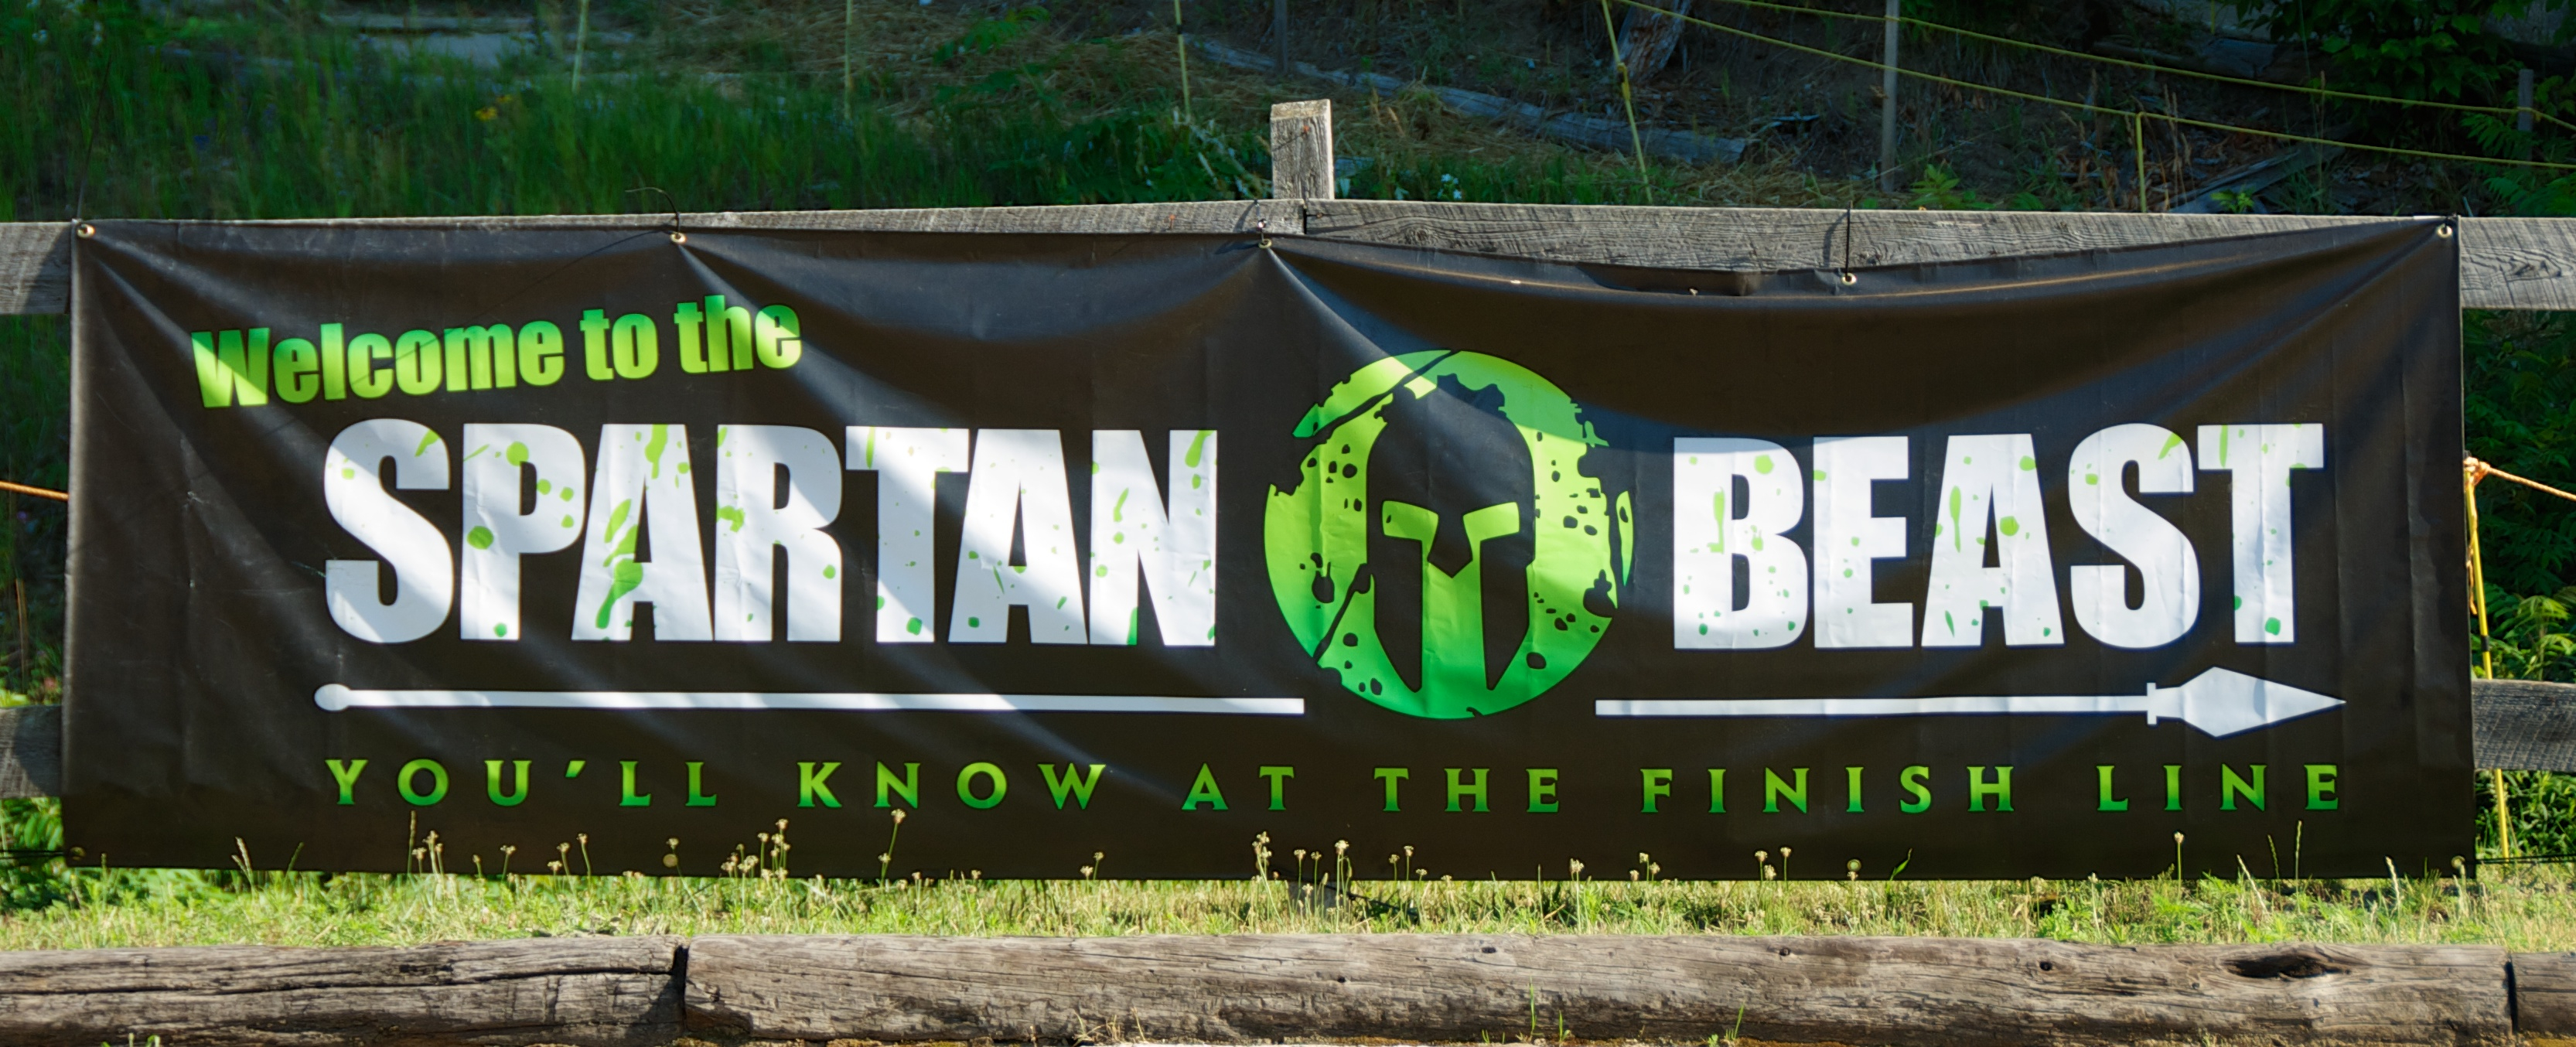 3331x1354 Friday 15 May 2015: Day before the Spartan Beast | FUNCTIONAL TRAINING